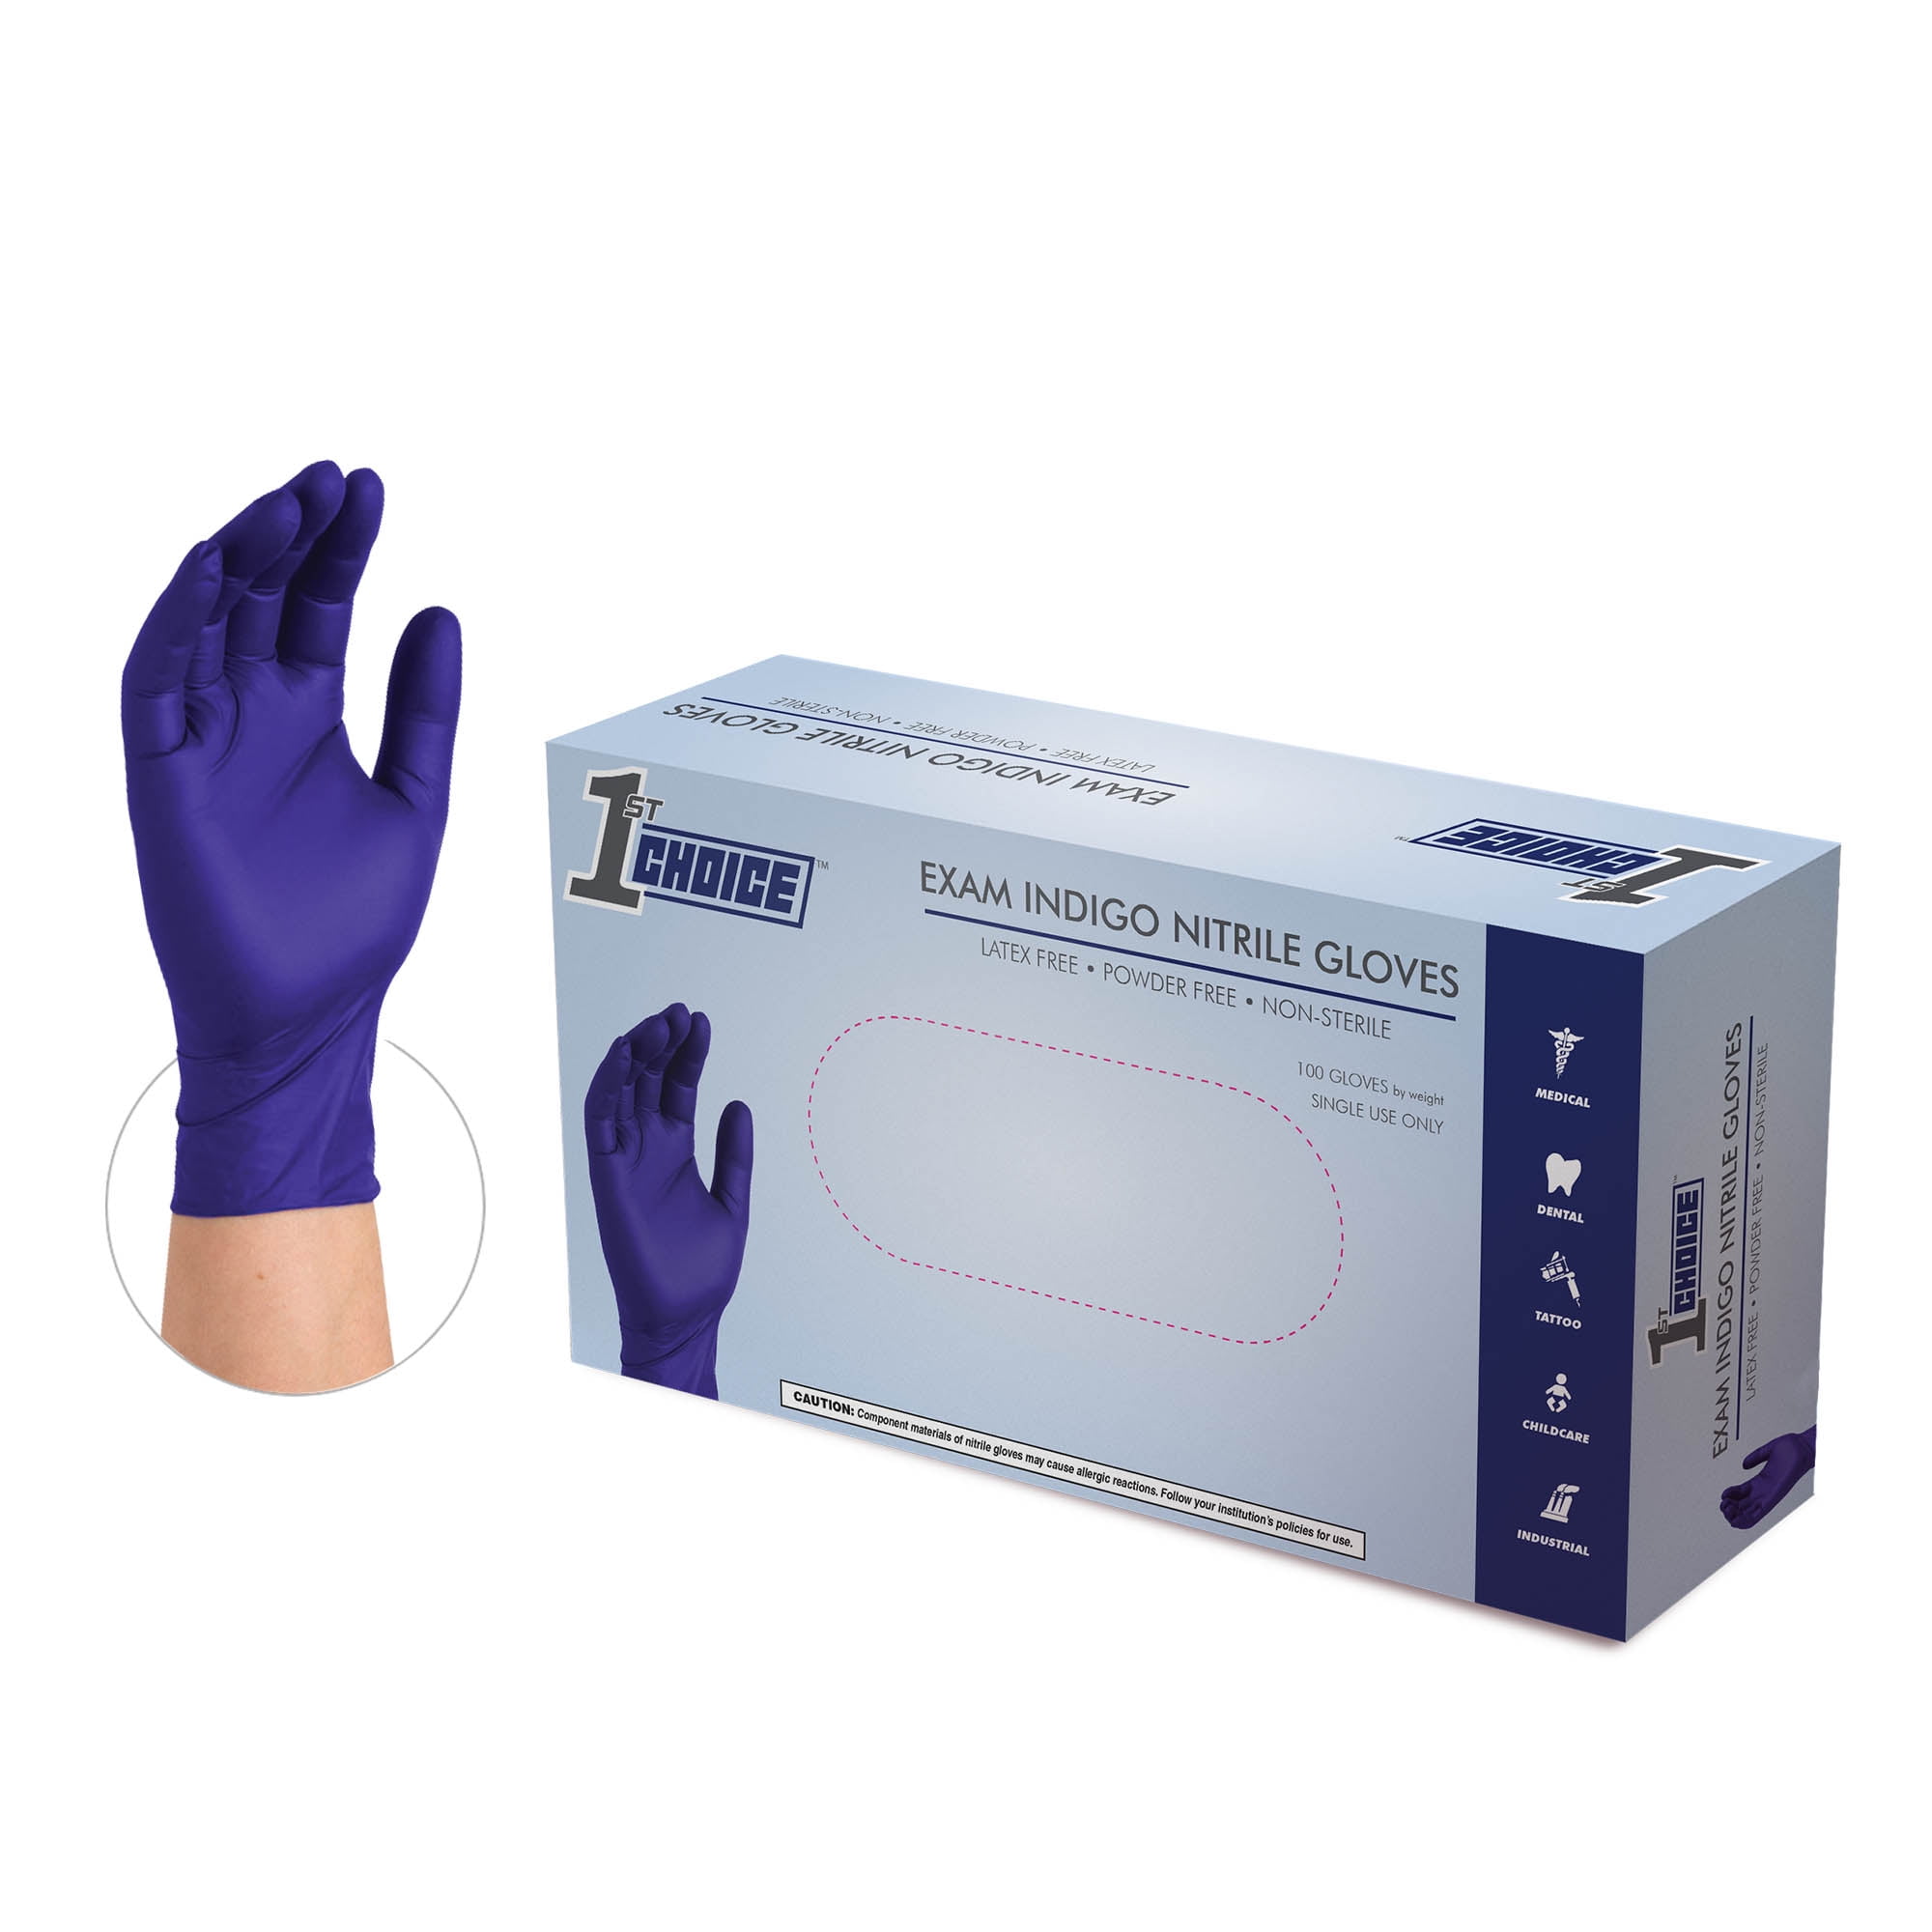 Large Medical Examination Glove Box of 100 Textured Powder-Free Latex Free Industrial Disposable Gloves 